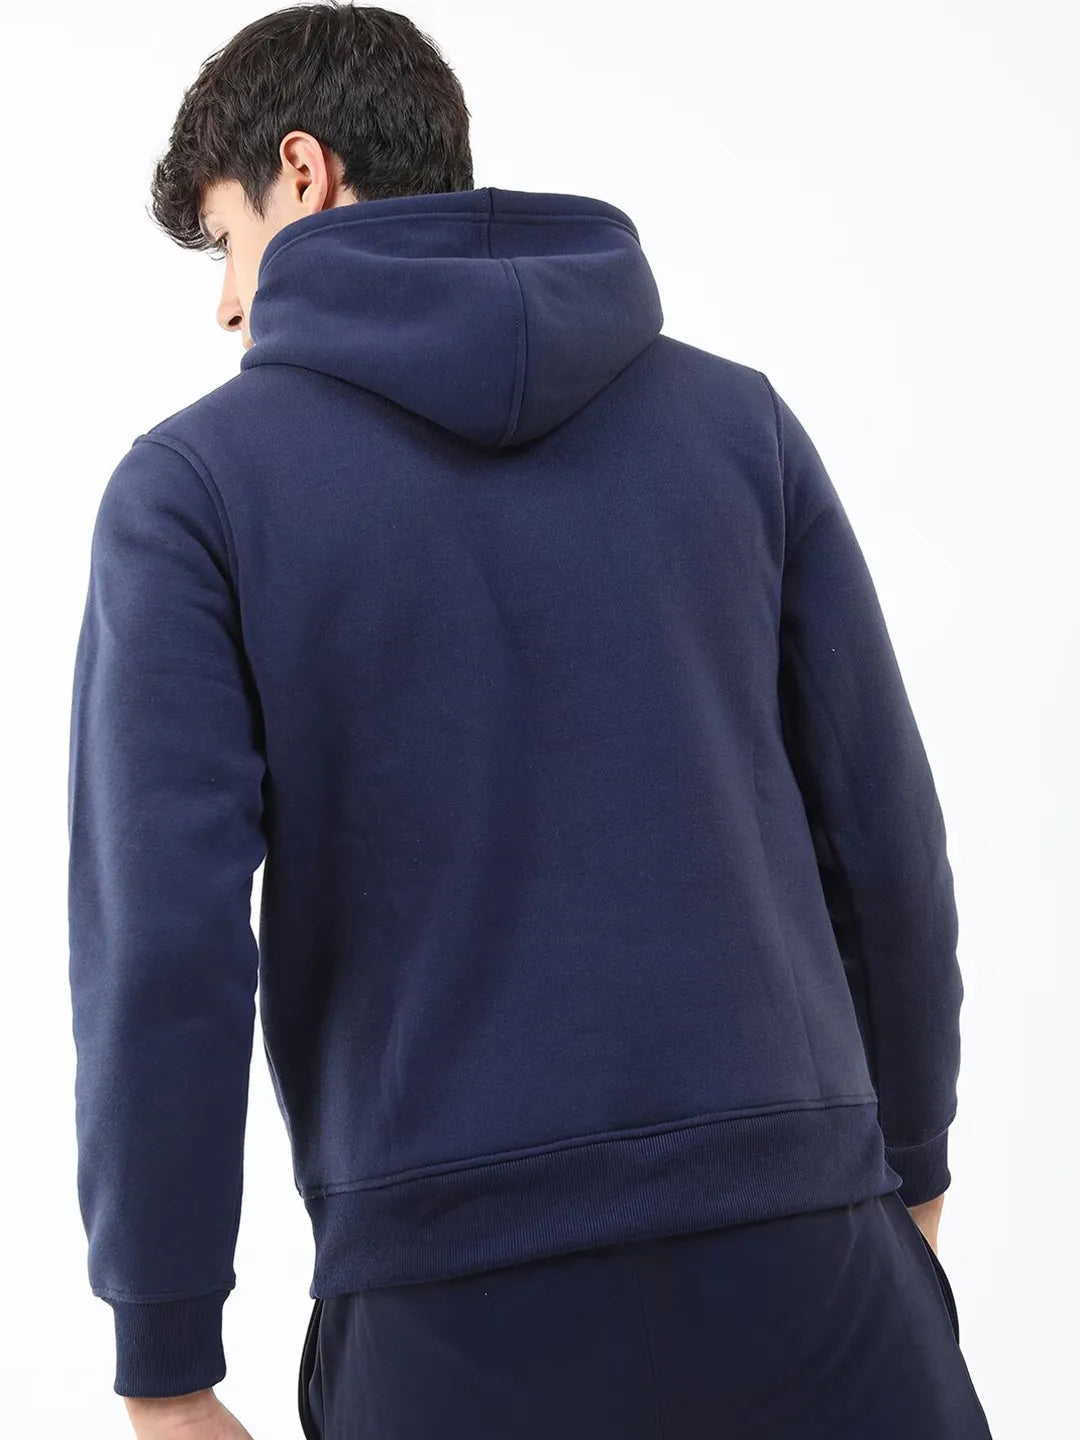 Beaming Navy-Blue Casual Full Sleeves Cotton Hoodie For Men and Women (Unisex)